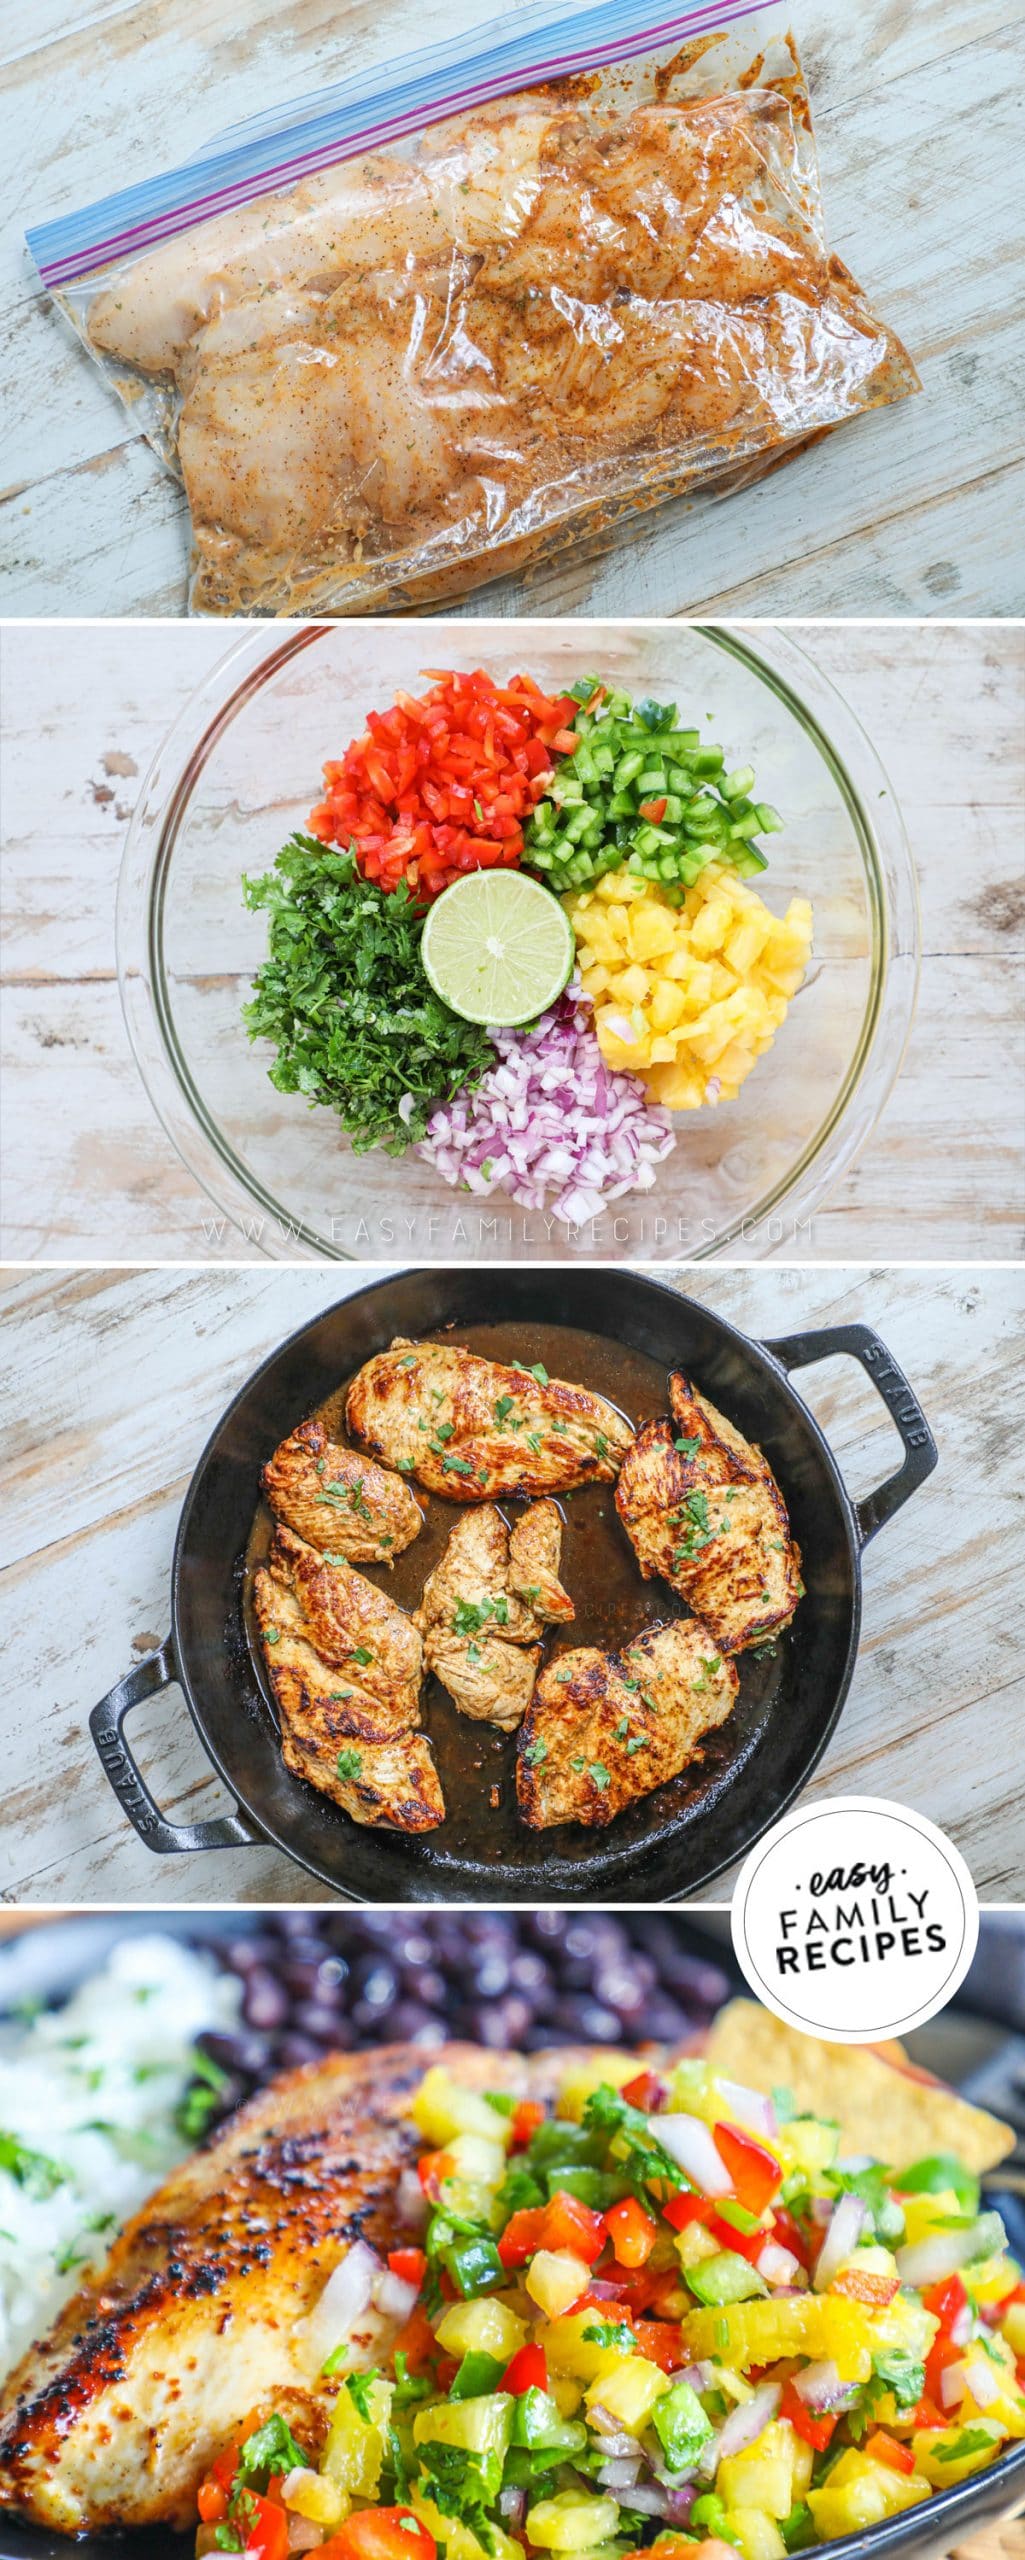 Process photos for How to make pineapple salsa chicken- 1. Marinate the chicken breast. 2. Make pineapple salsa. 3. Cook chicken breast in skillet. 4. Serve chicken with a scoop of pineapple salsa on top.